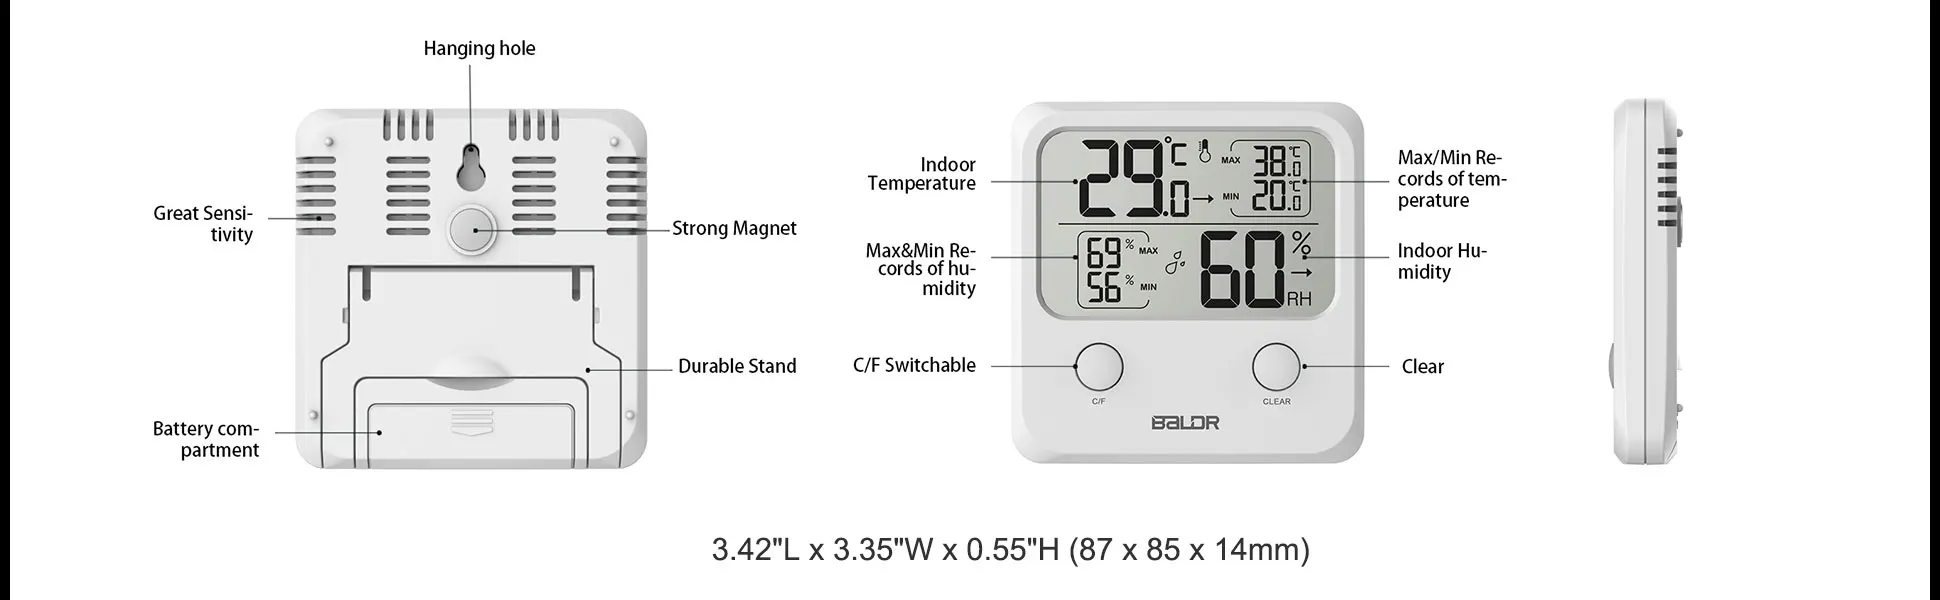 BALDR B0335 Hygrometer Digital Indoor Thermometer LCD Temperature Humidity Meter for sale online 